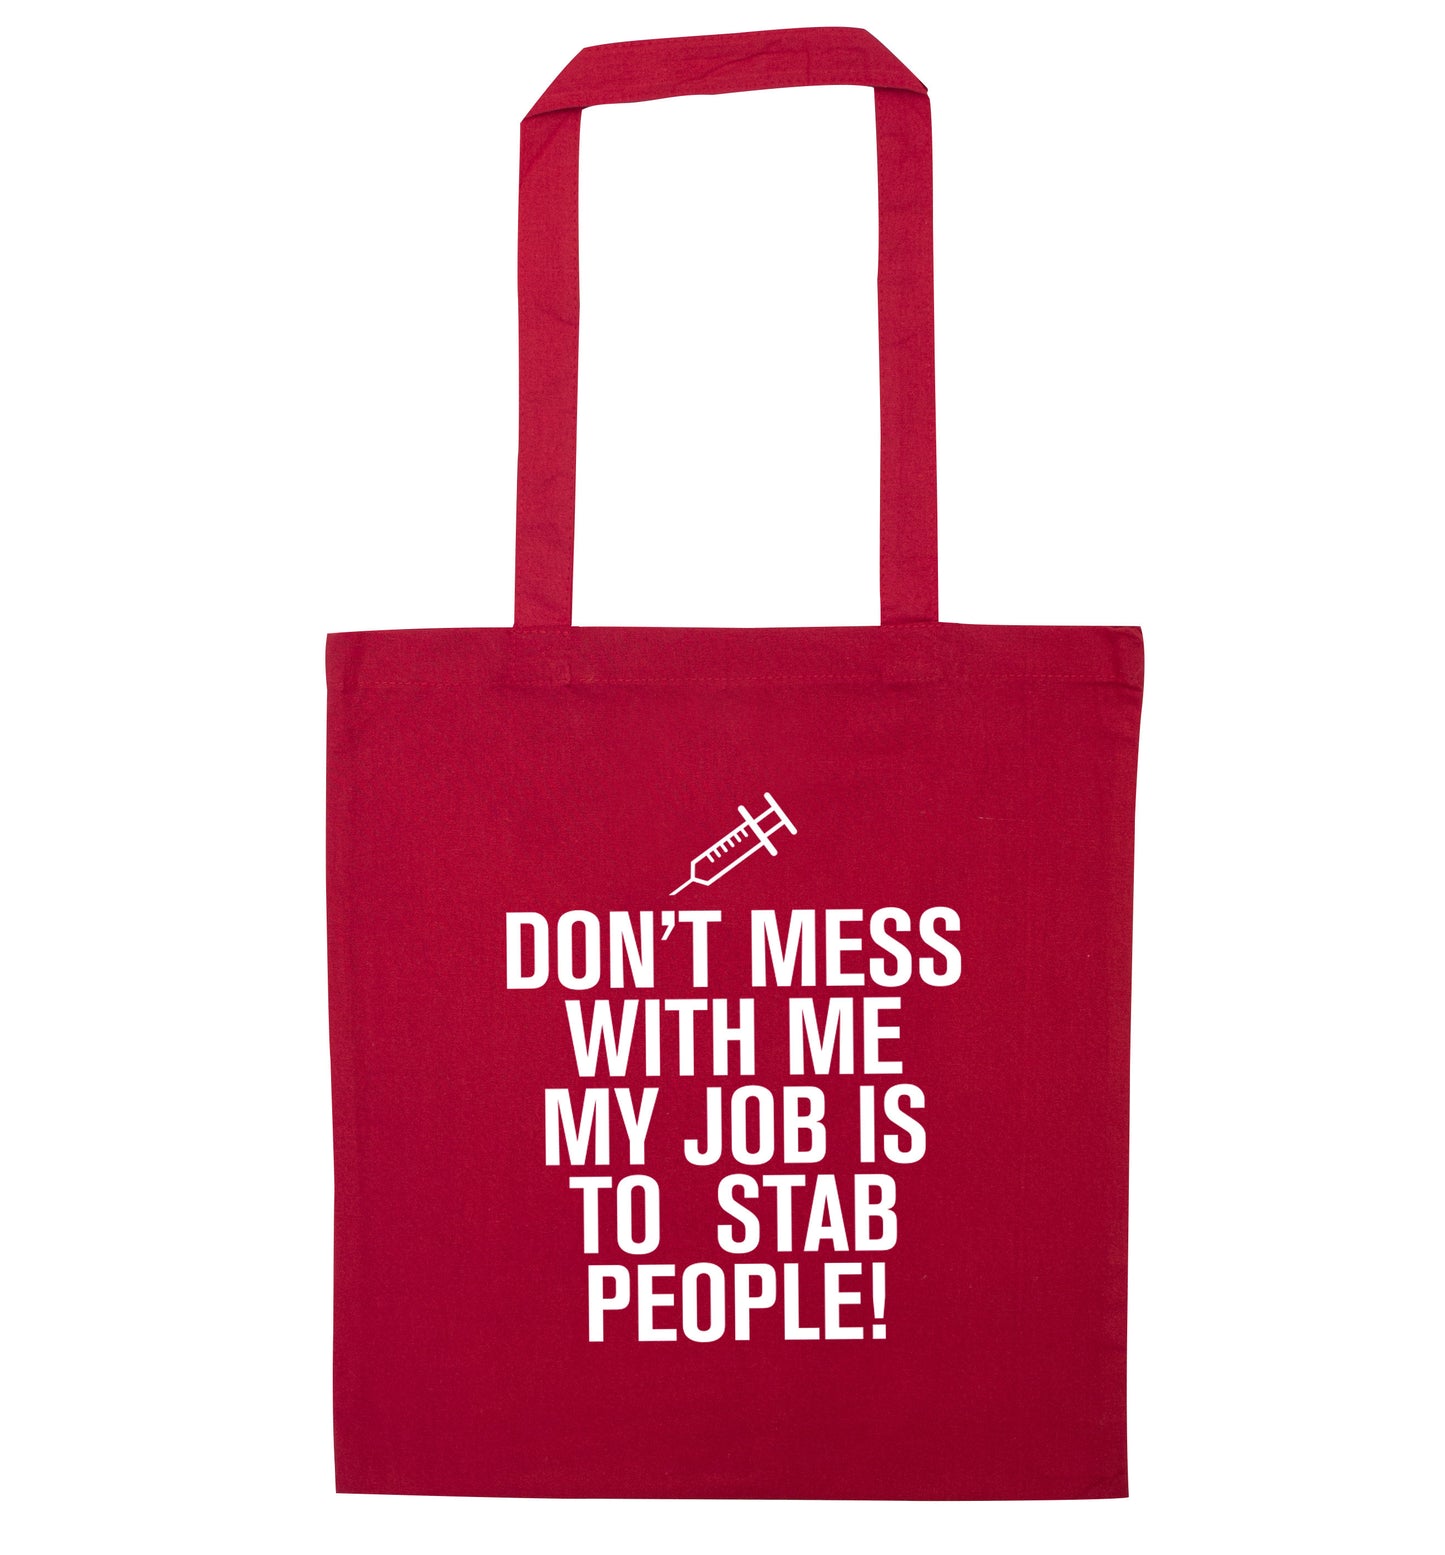 Don't mess with me my job is to stab people! red tote bag